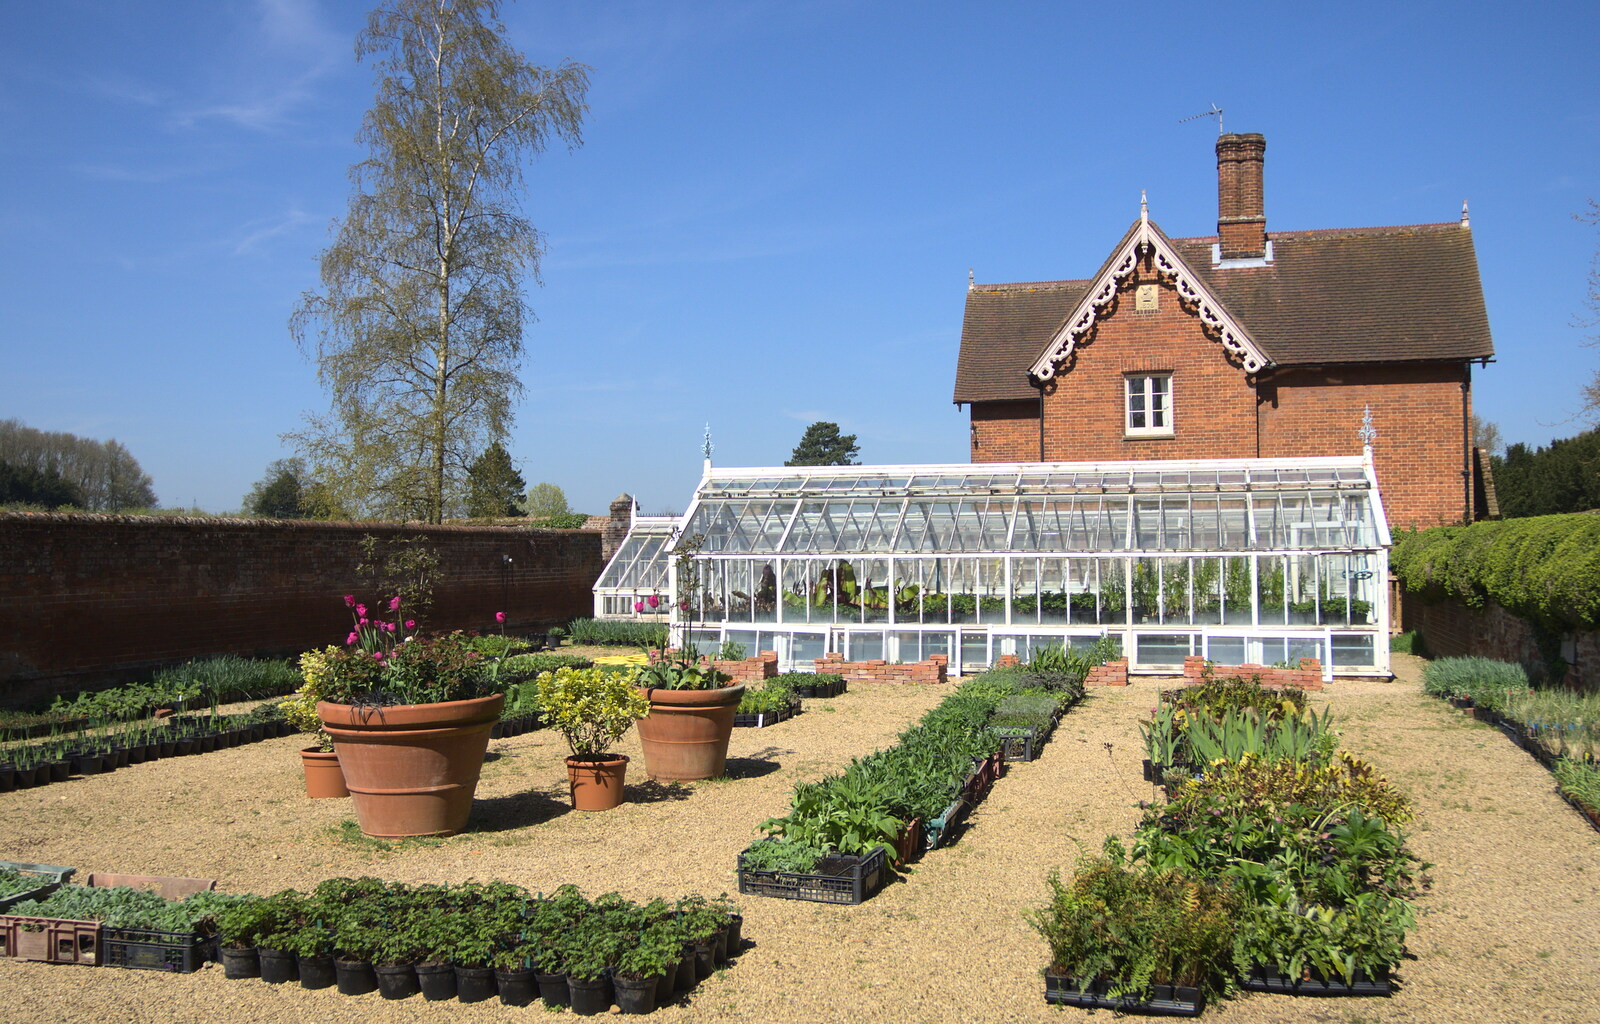 A greenhouse and a load of plants laid out from A Trip to Audley End House, Saffron Walden, Essex - 16th April 2014